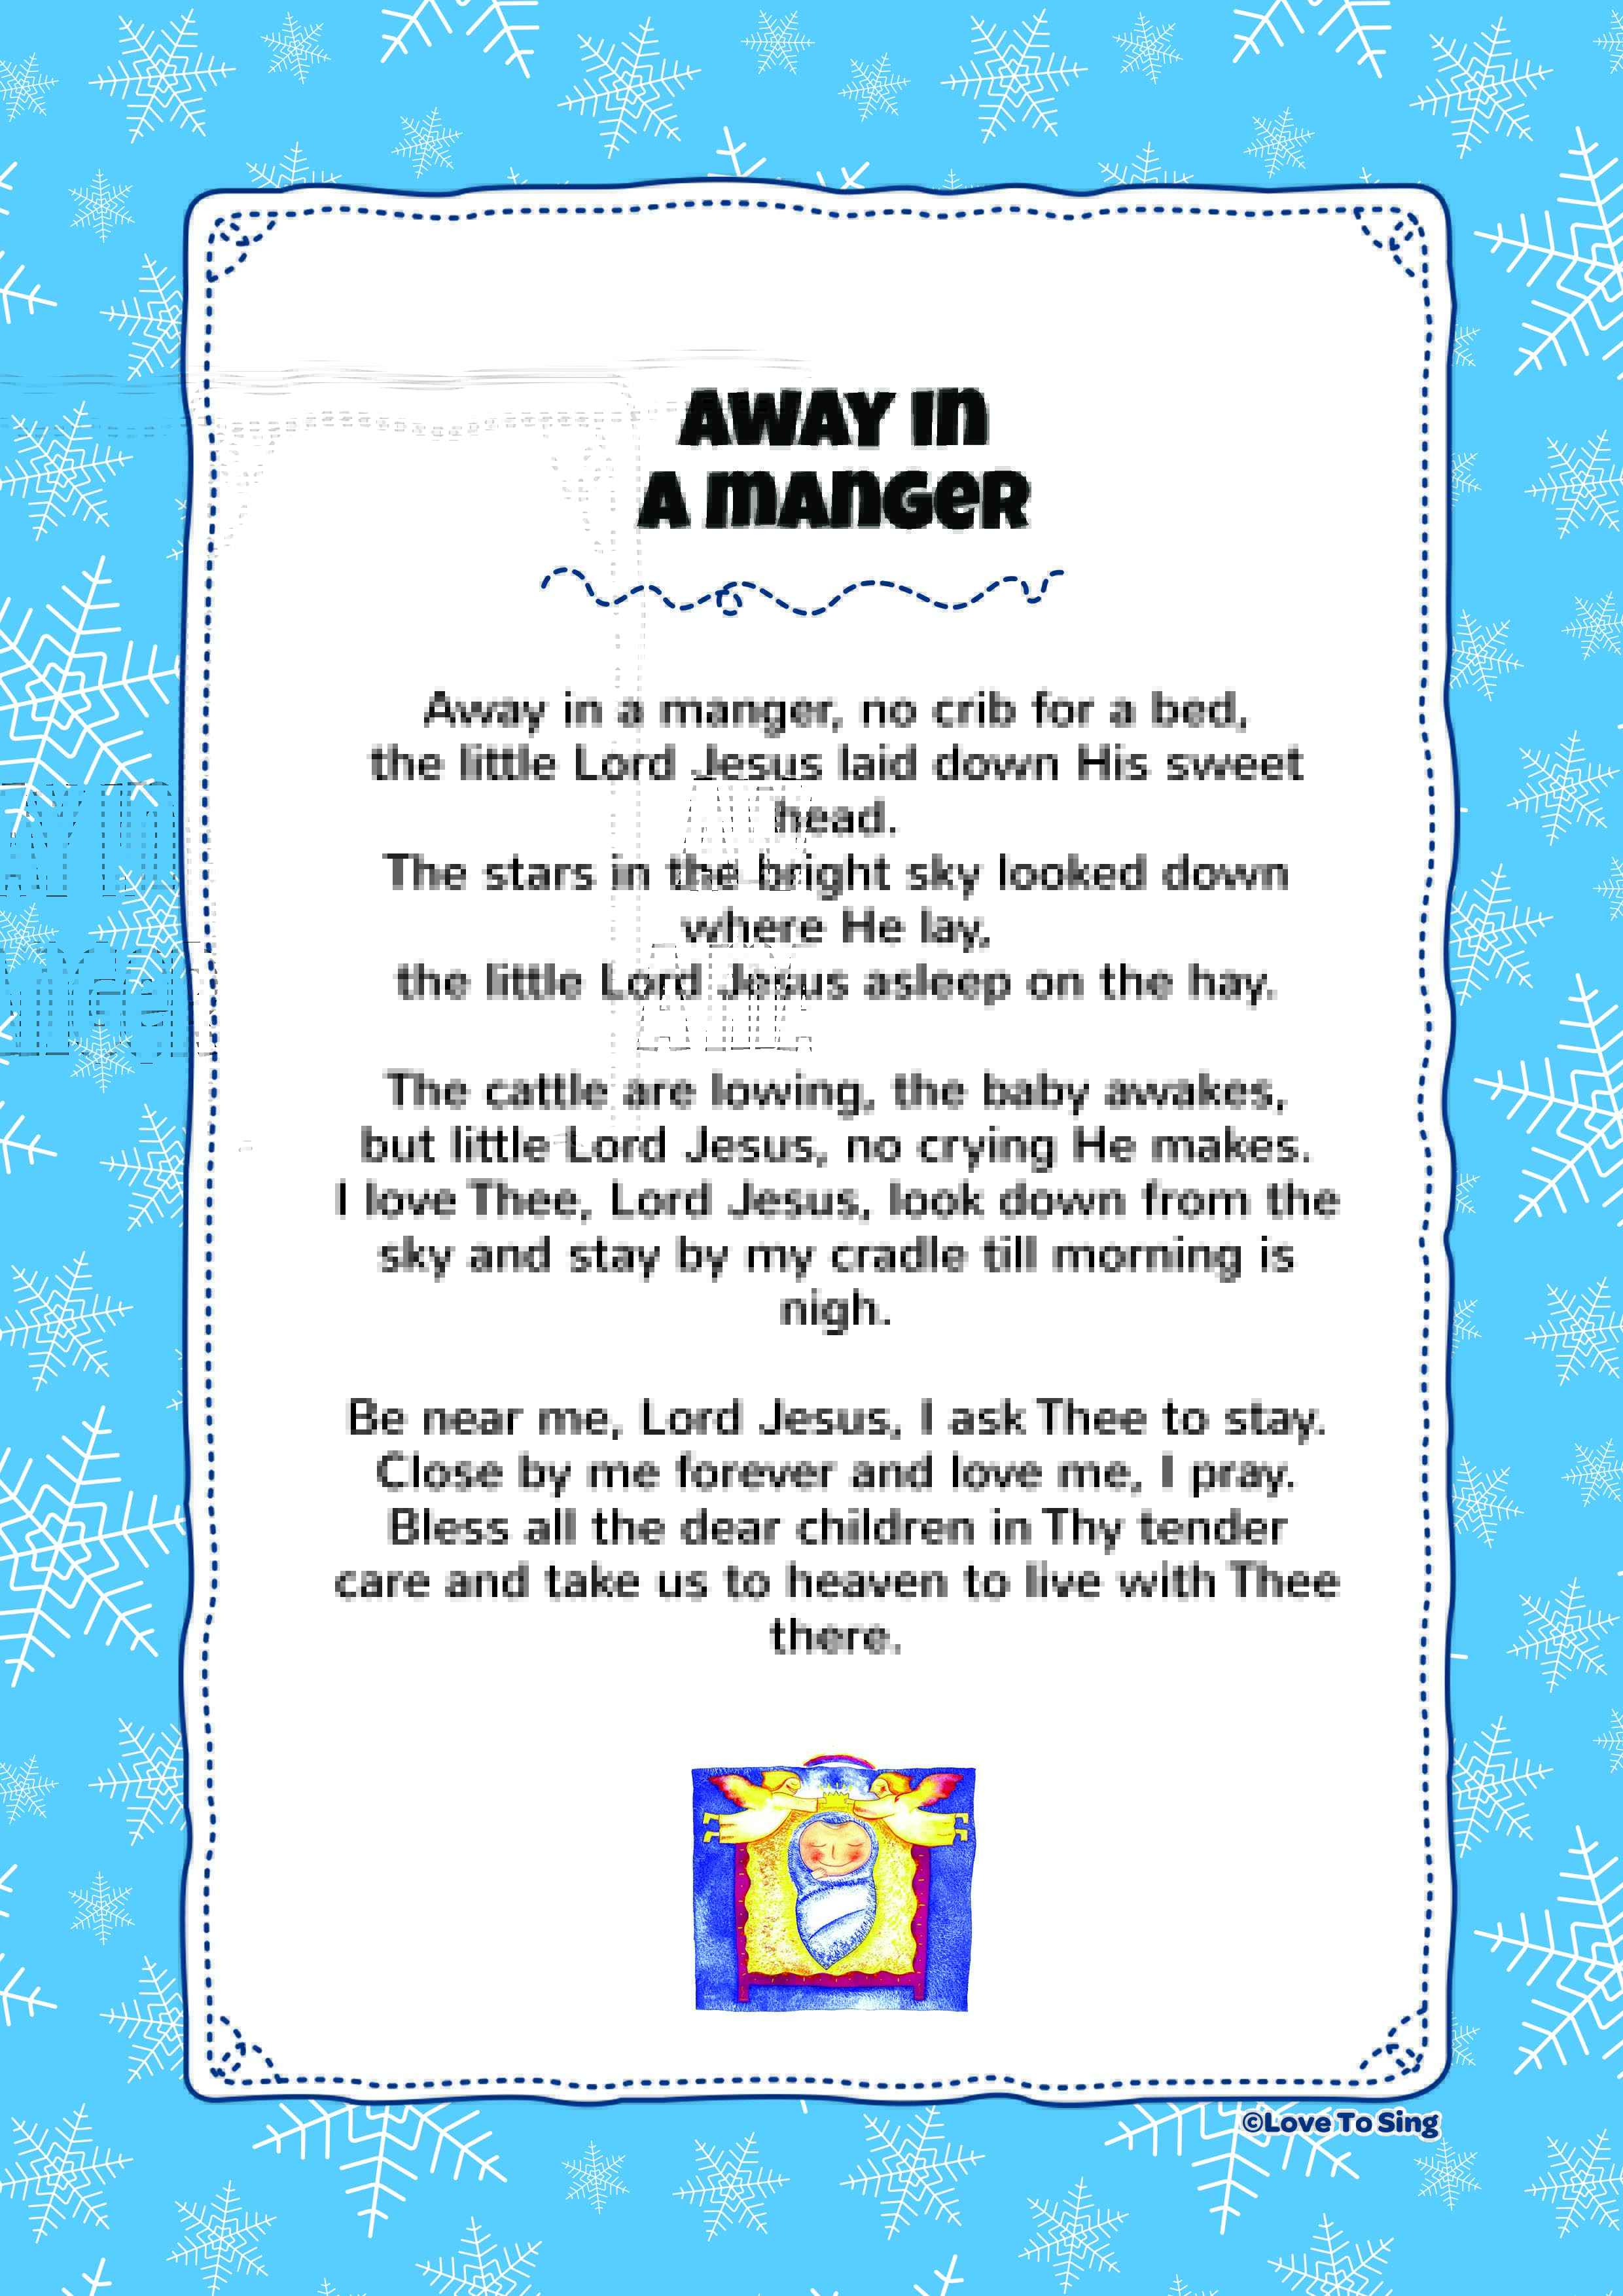 Away In A Manger Kids Video Song with FREE Lyrics & Activities!